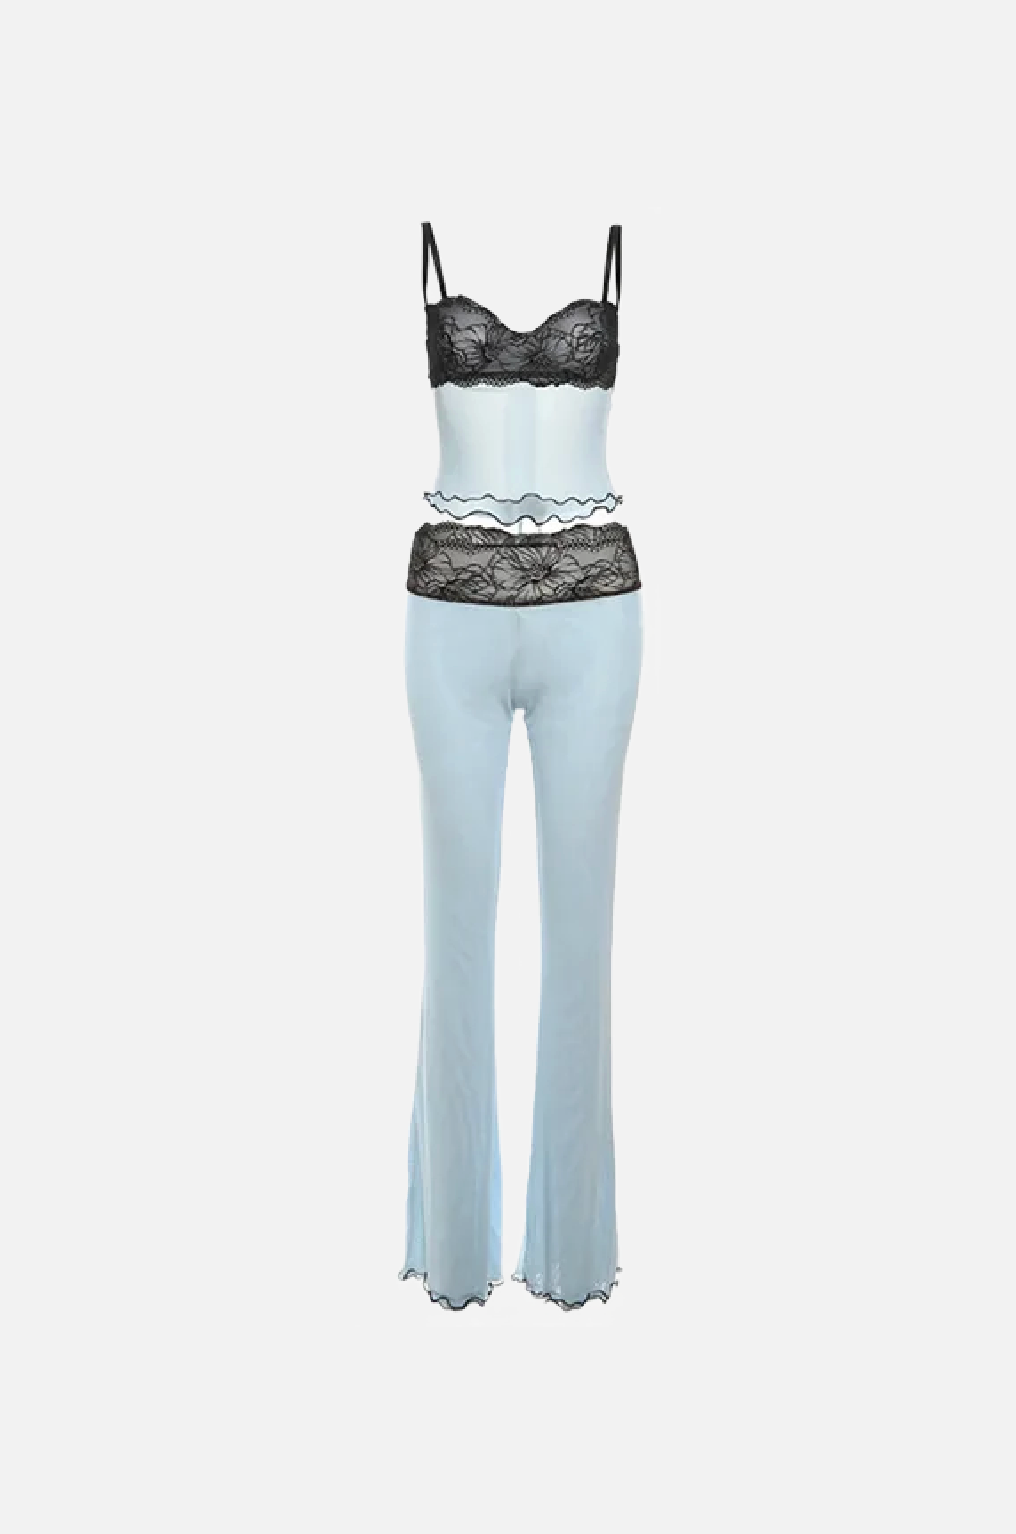 Villa Blvd Lace and Sheer Camisole Top + Pants Set ☛ Multiple Colors Available ☚